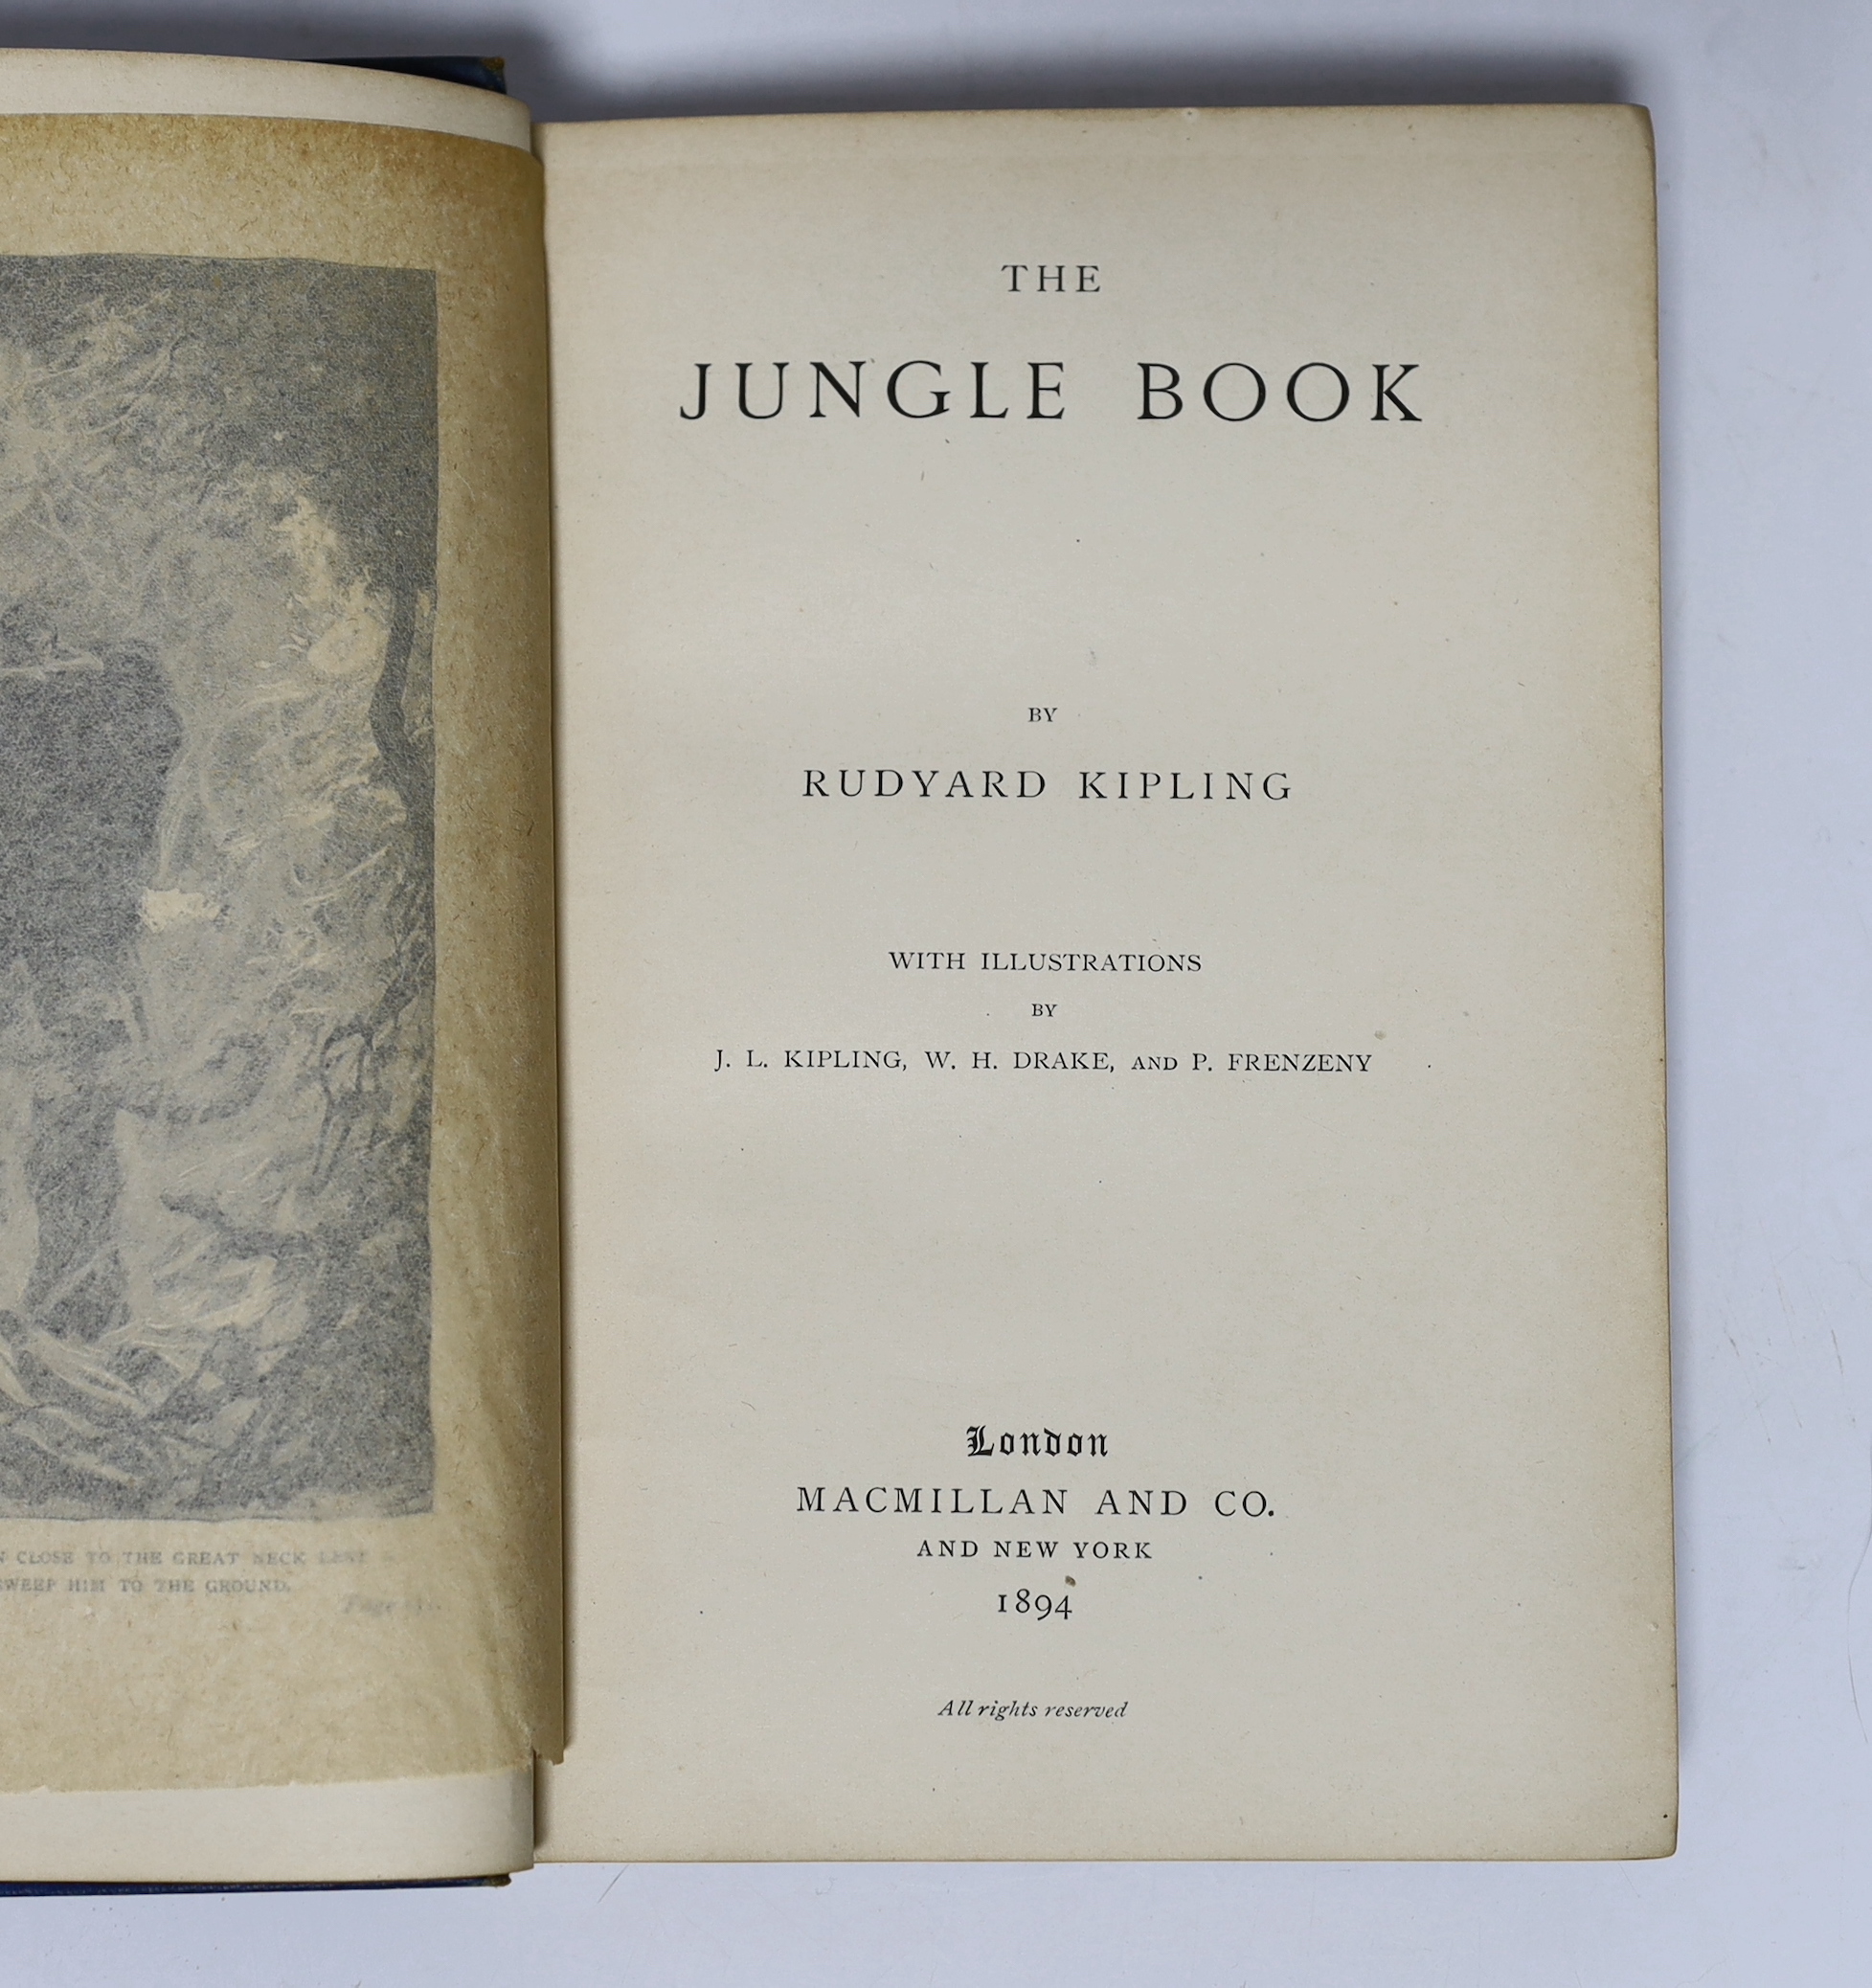 Kipling, Rudyard - The Jungle Book. First Edition. frontis., num. full page and other illus. (by John Lockwood Kipling and others), text decorations; publisher's gilt pictorial cloth and ge. 1894; Kipling, Rudyard - The